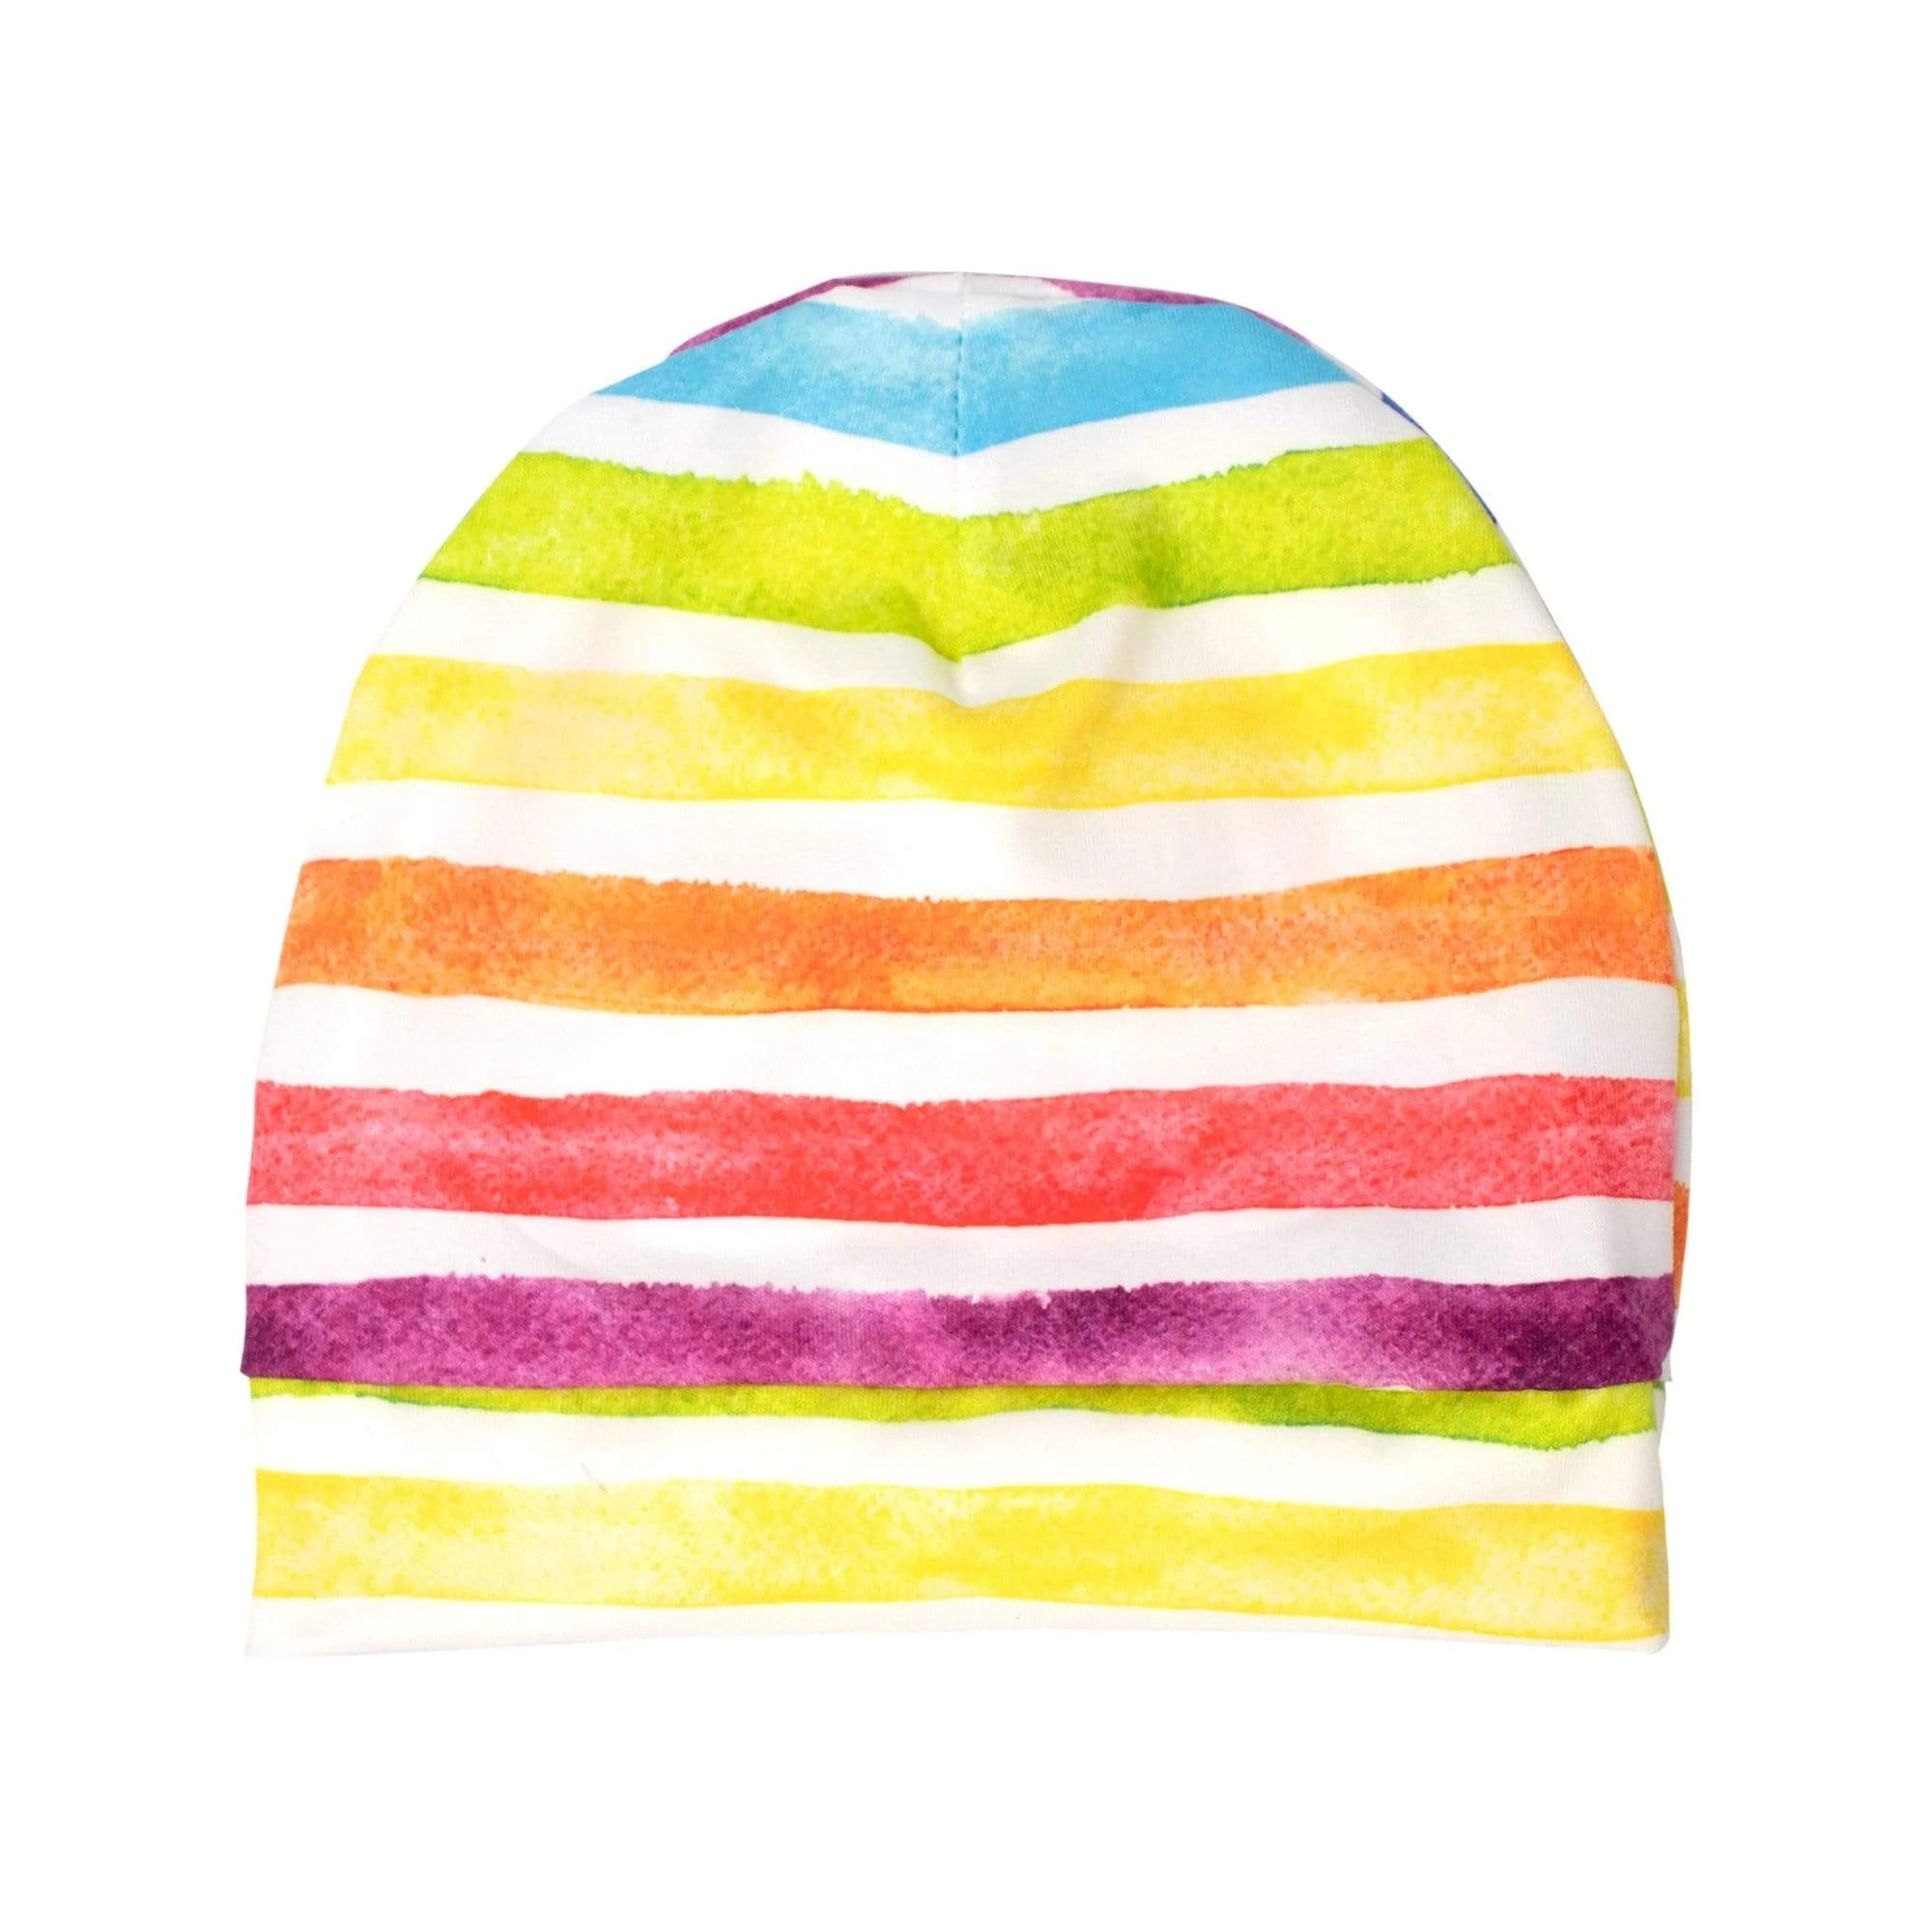 Image of Imagine Hat with Rainbow Connection print